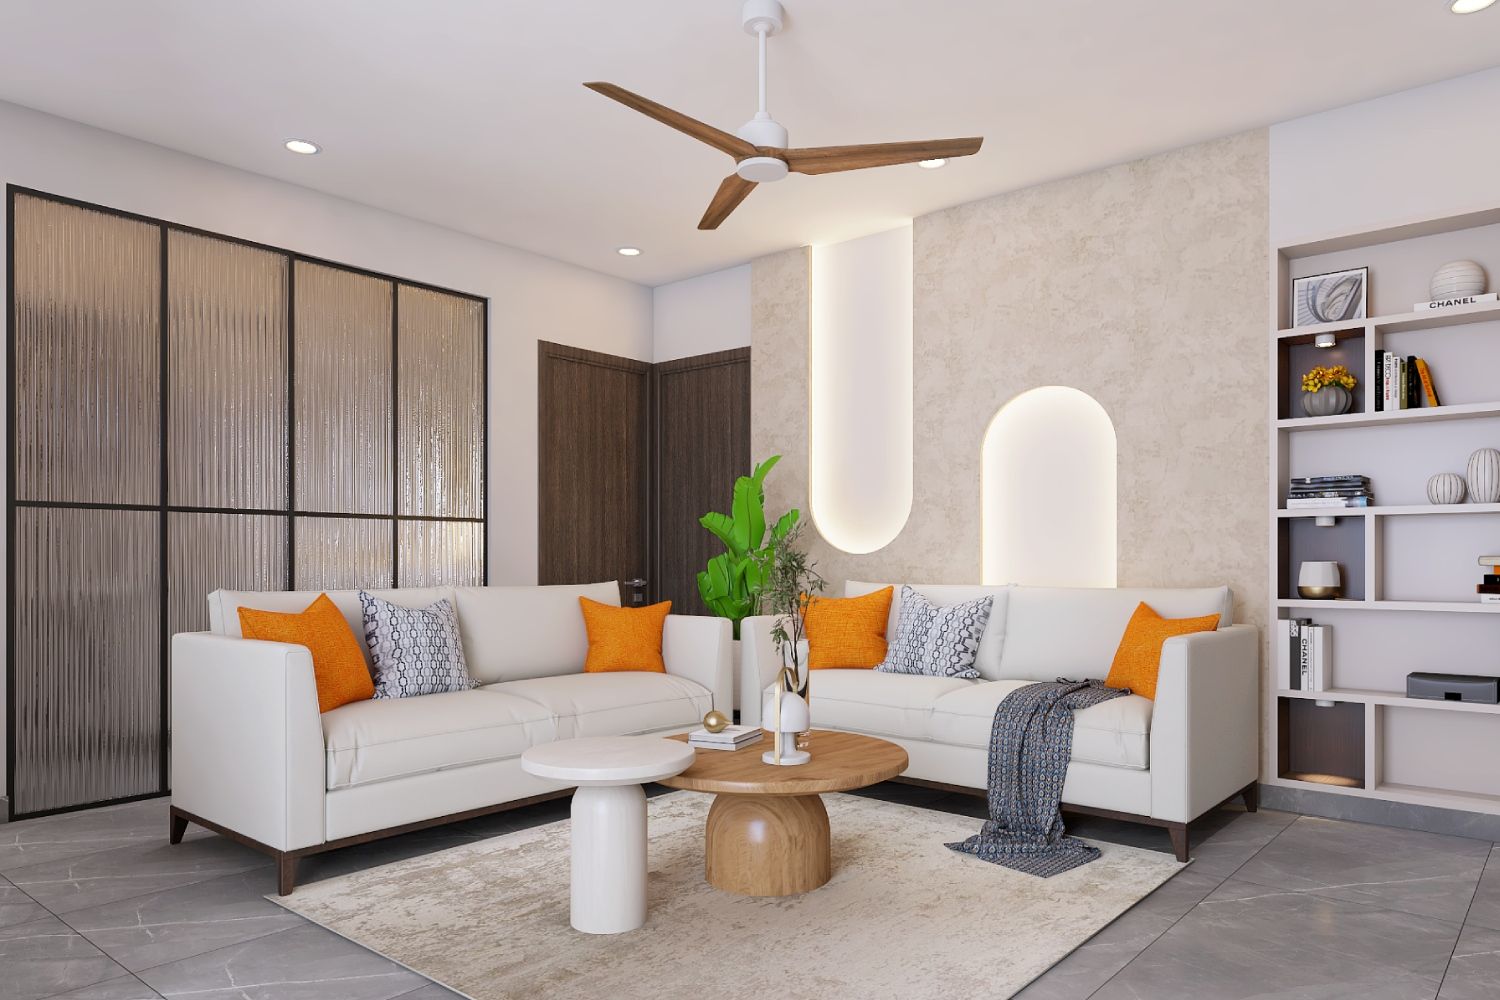 Contemporary Living Room Design With L-Shaped White Sofa And Textured Beige Wall Panel